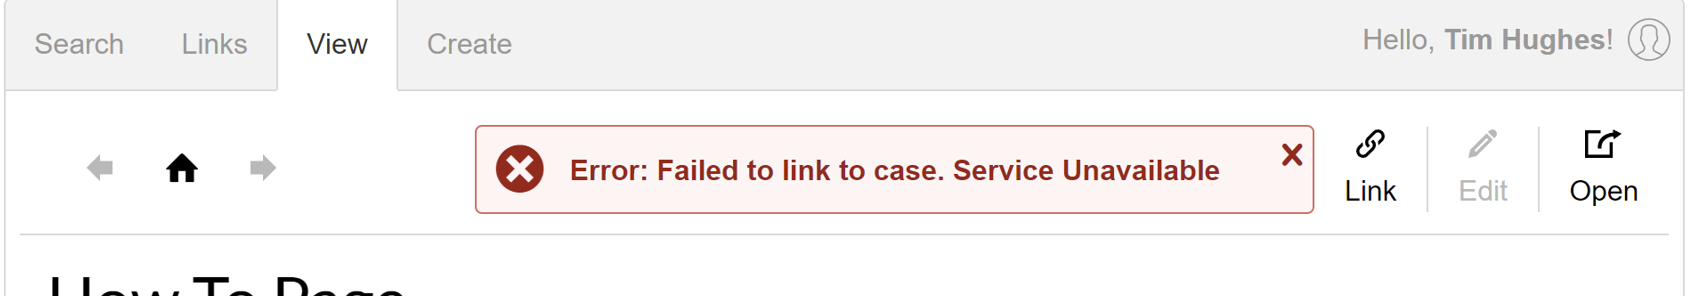 The error message looks normal, with text in it that is readable. It says, "Error: Failed to link to case. Service Unavailable."